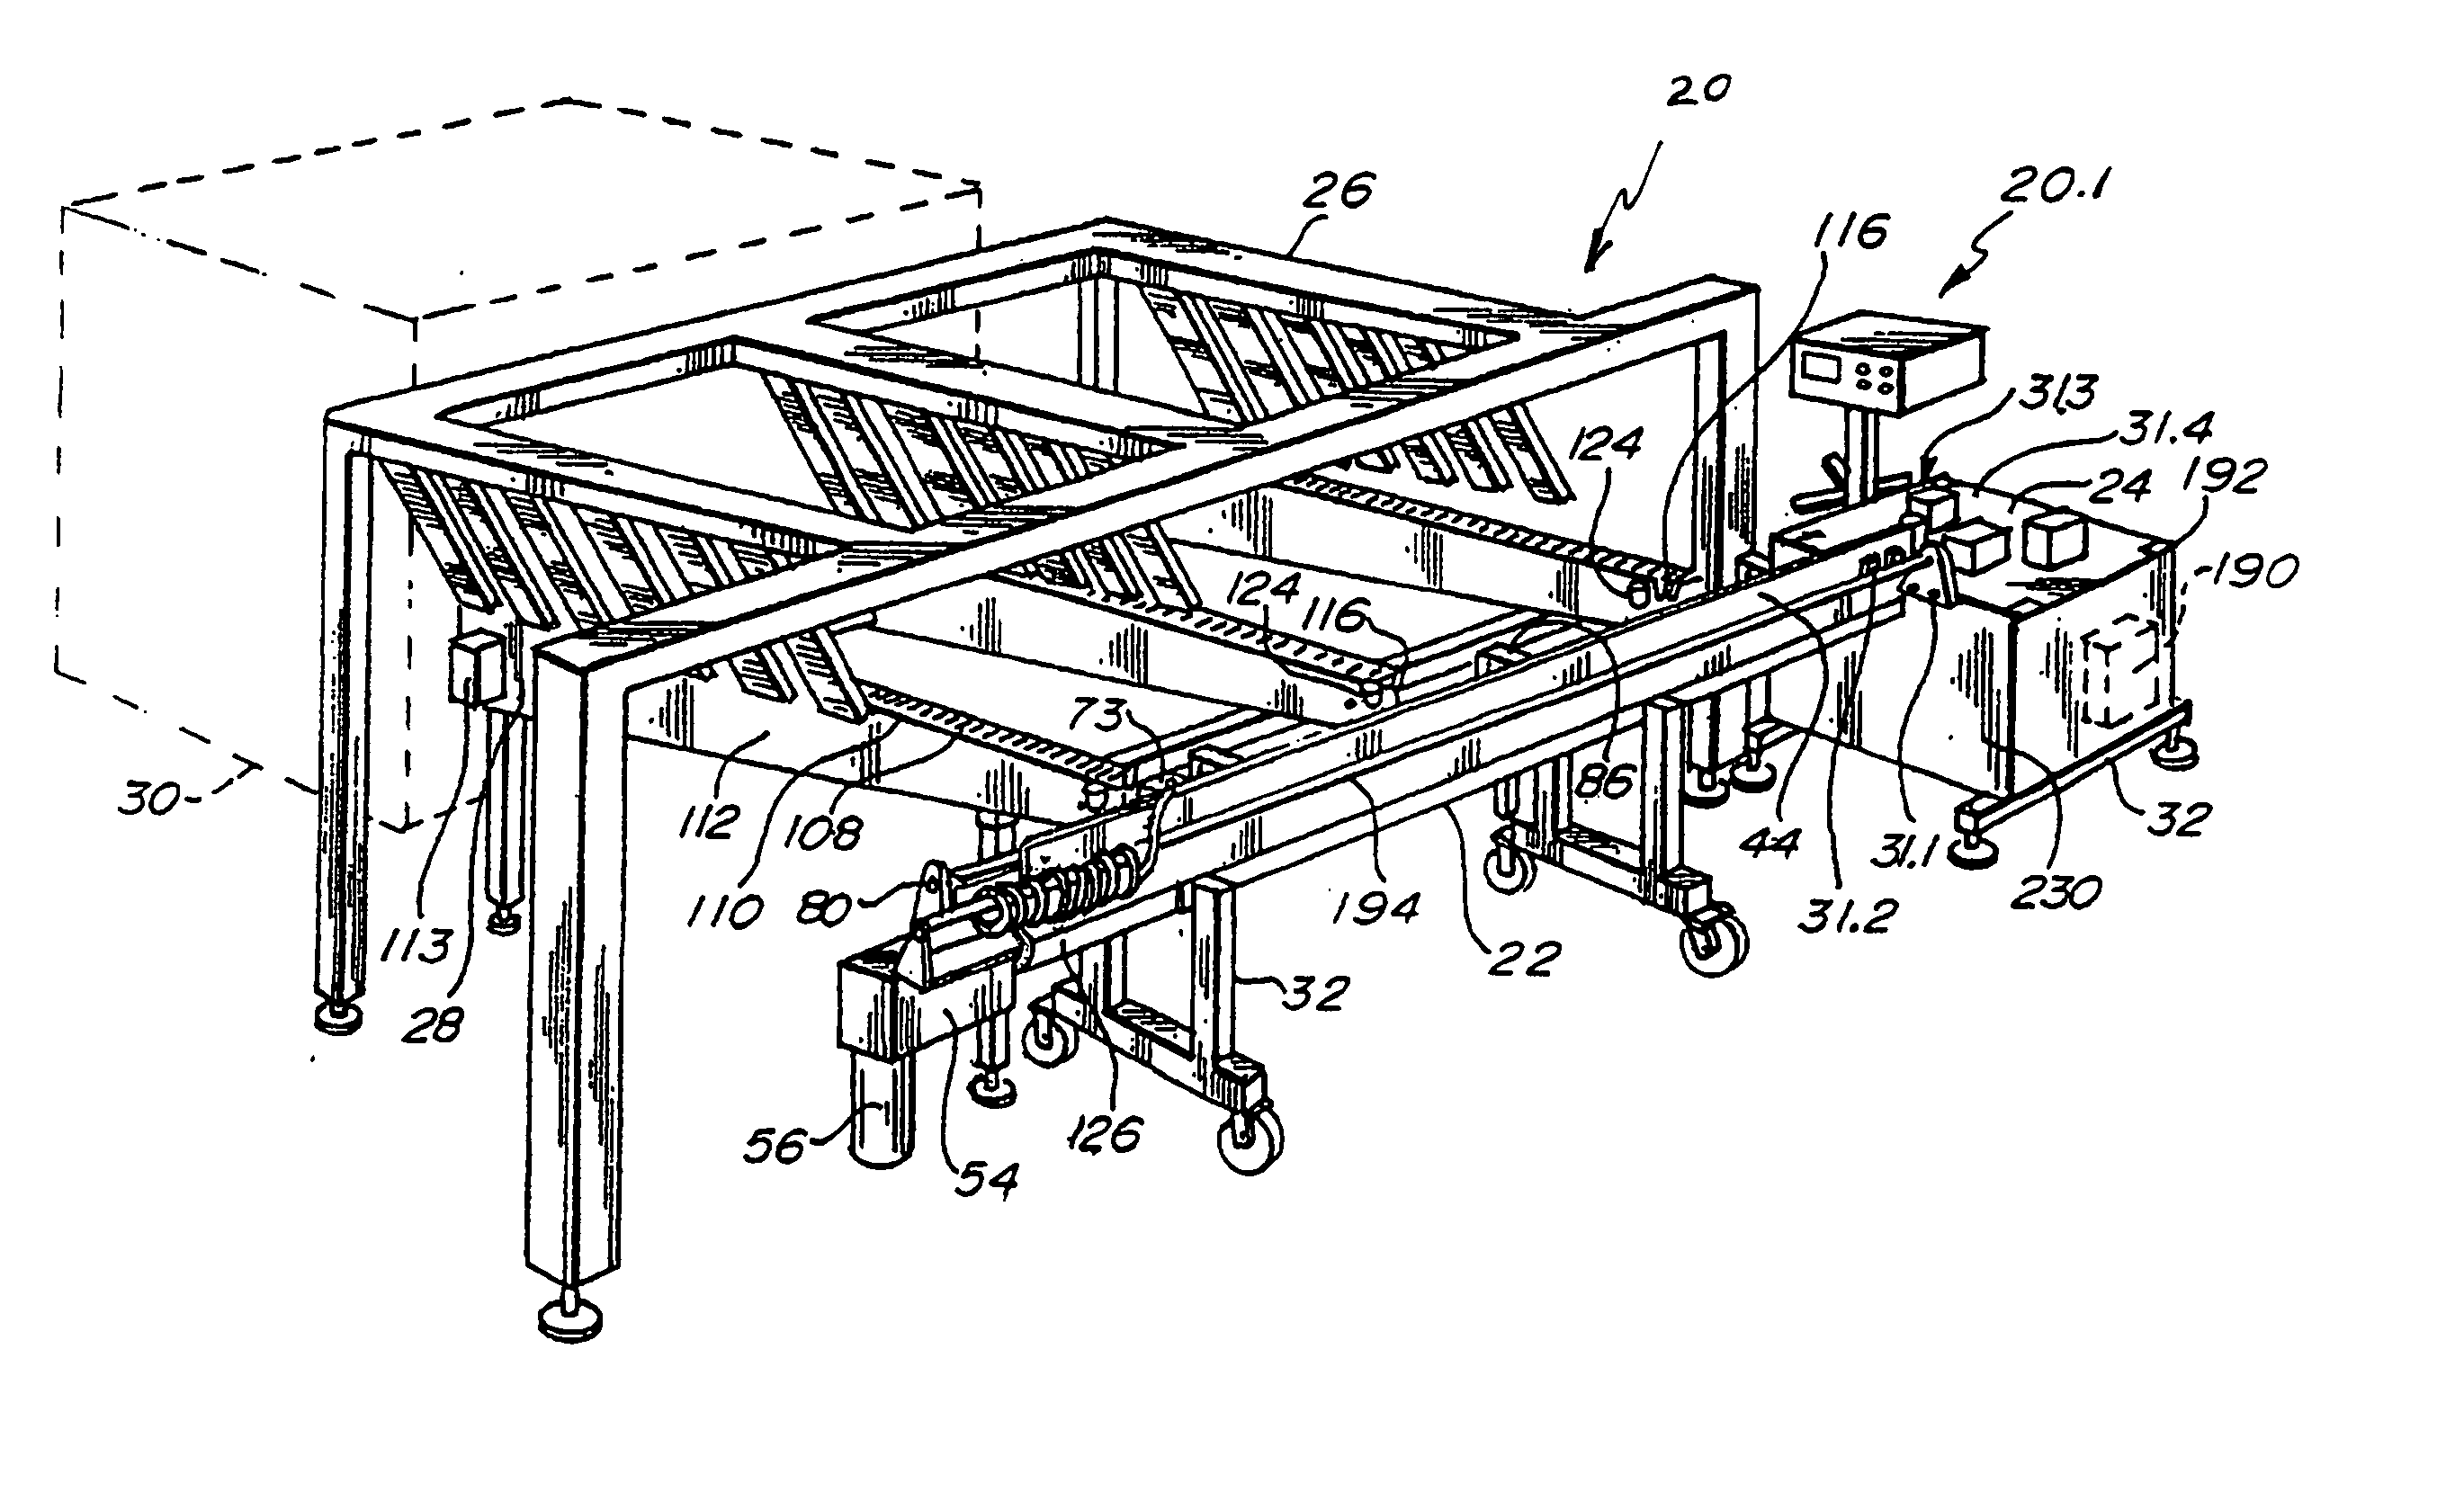 Automated board processing apparatus